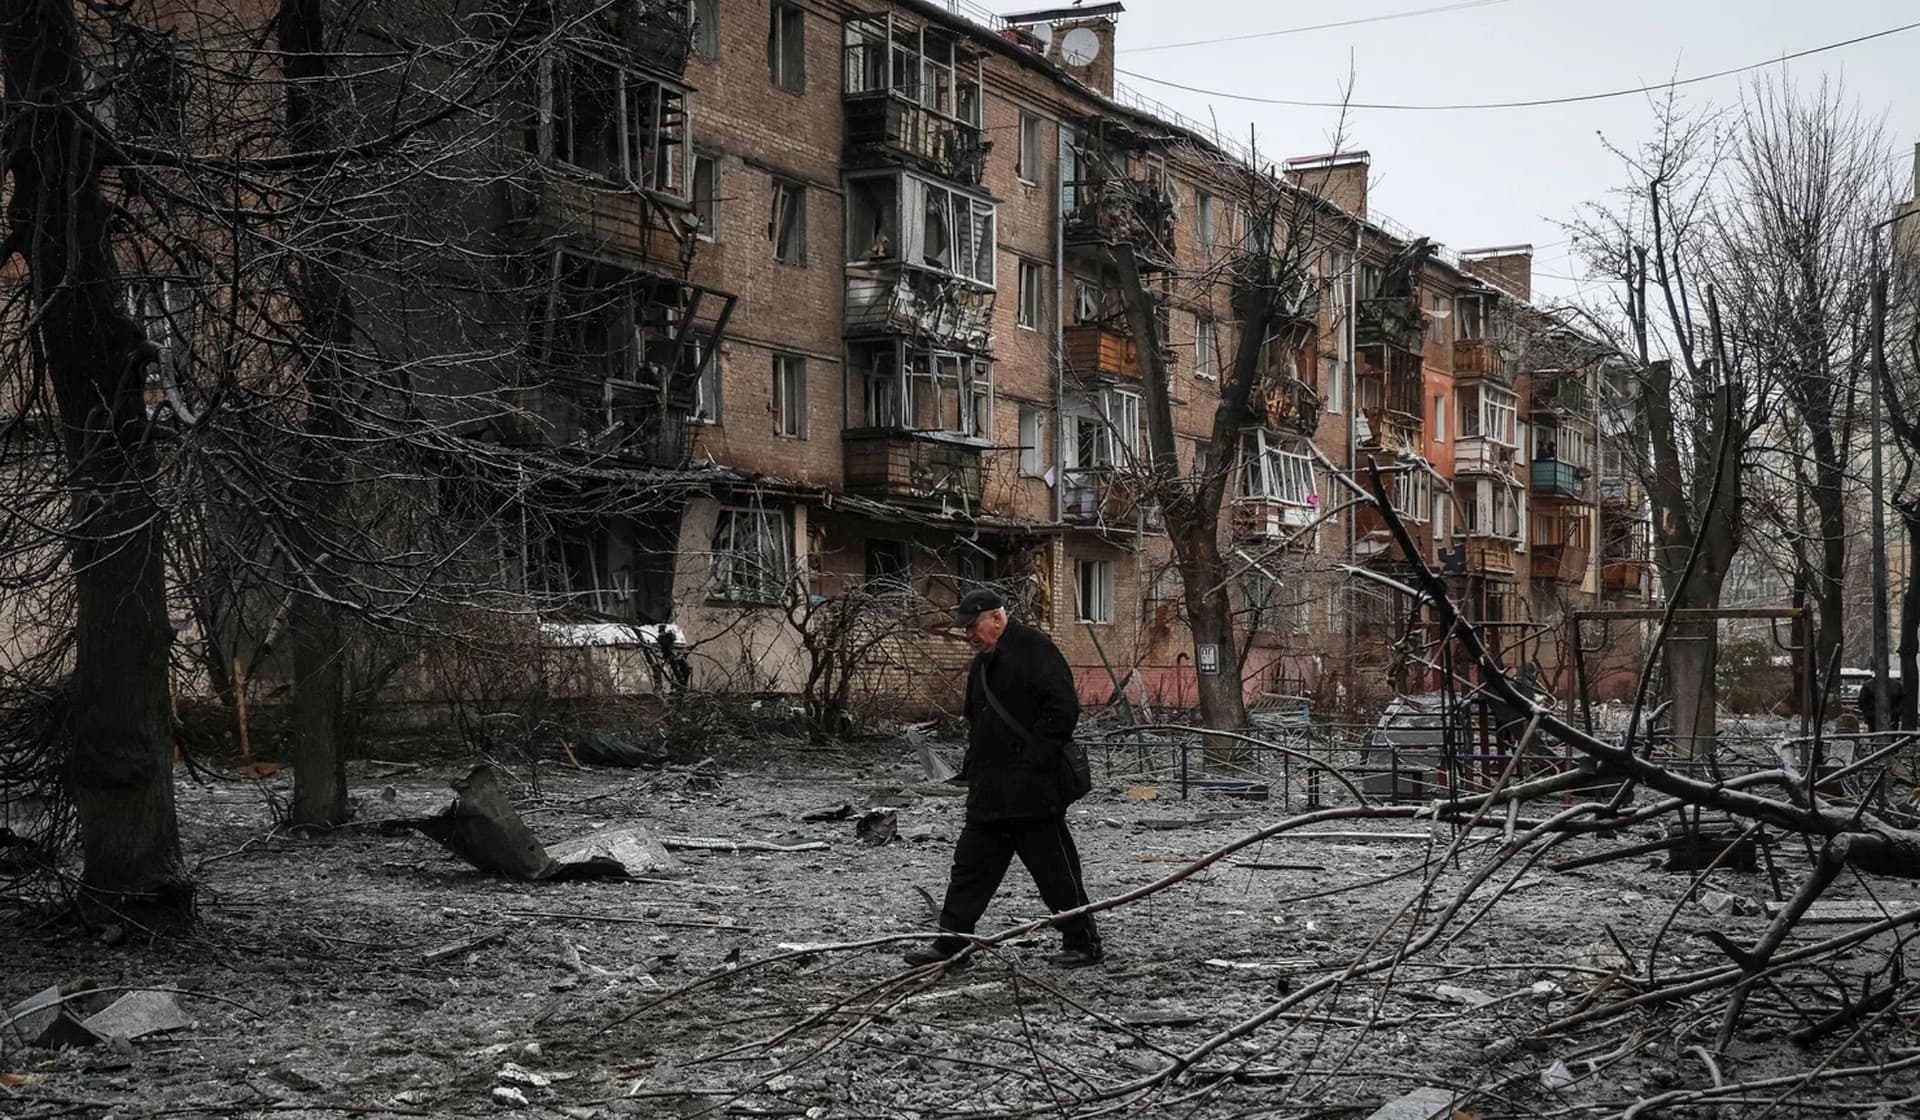 A local resident walks near a residential building destroyed by a Russian missile attack in the town of Vyshhorod